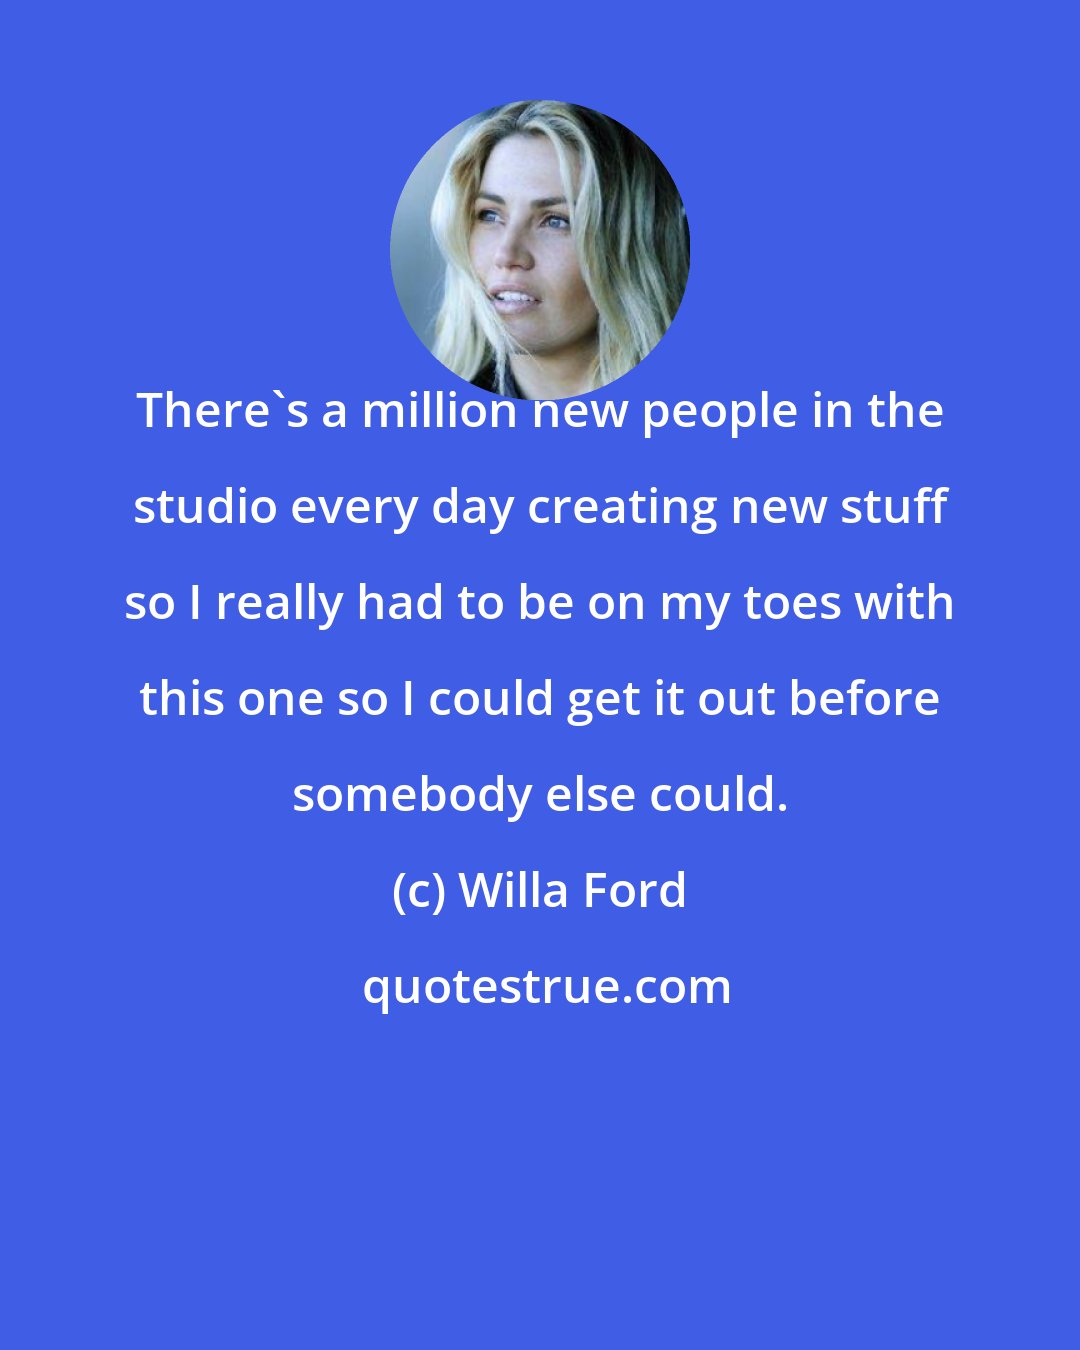 Willa Ford: There's a million new people in the studio every day creating new stuff so I really had to be on my toes with this one so I could get it out before somebody else could.